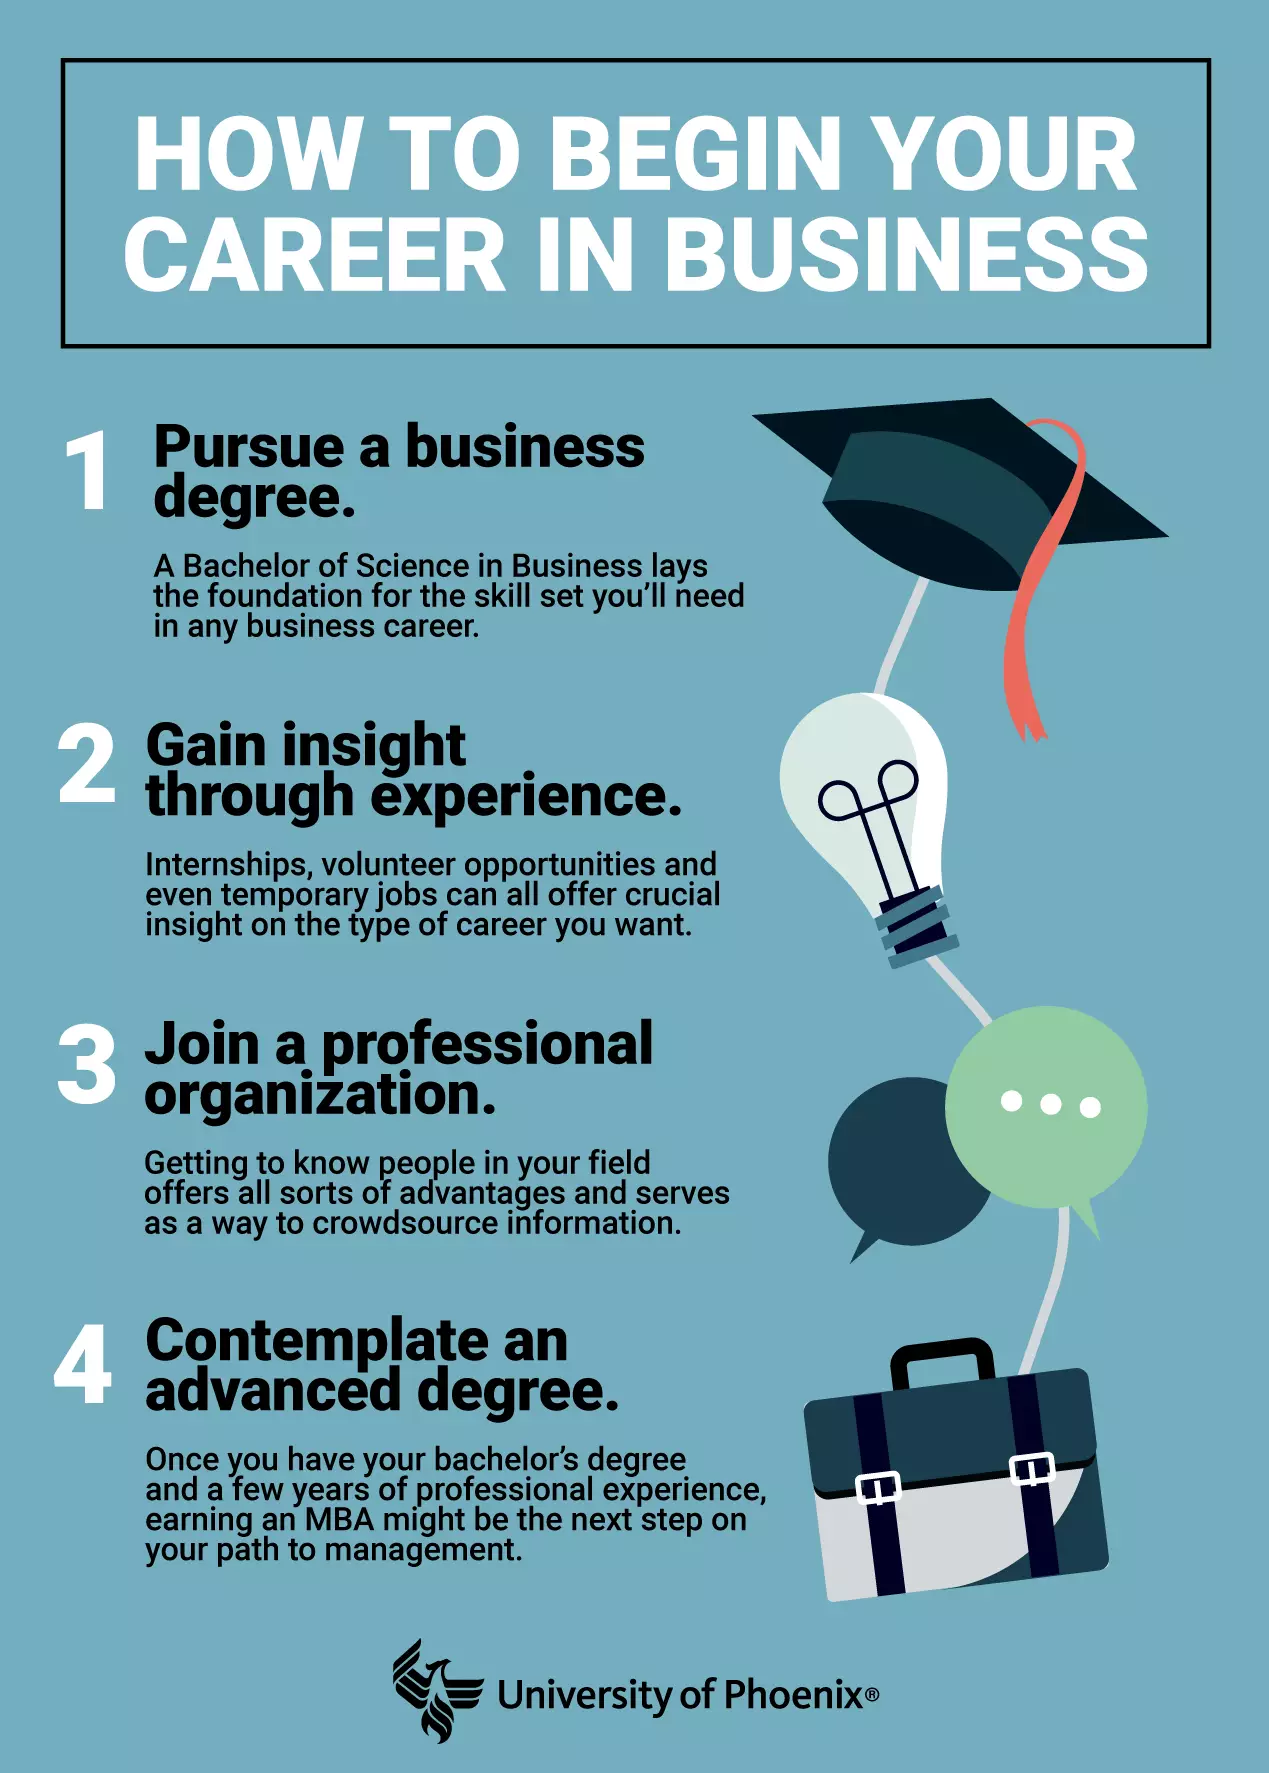 How to begin your career in business infographic